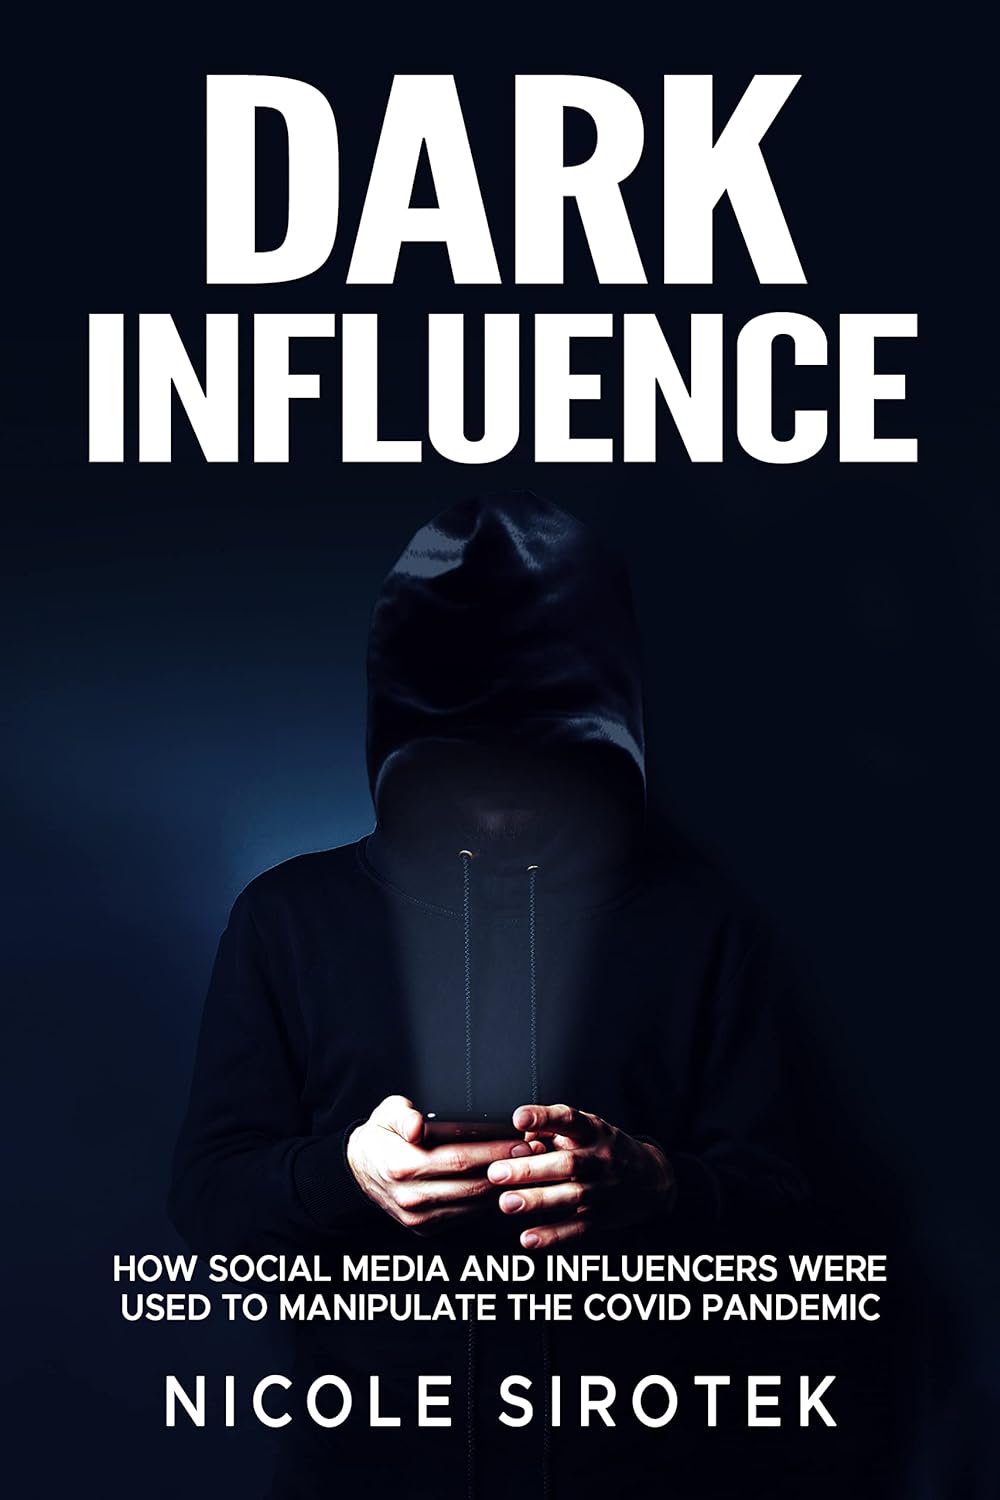 Dark Influence: How Social Media and Influencers Were Used to Manipulate the COVID Pandemic